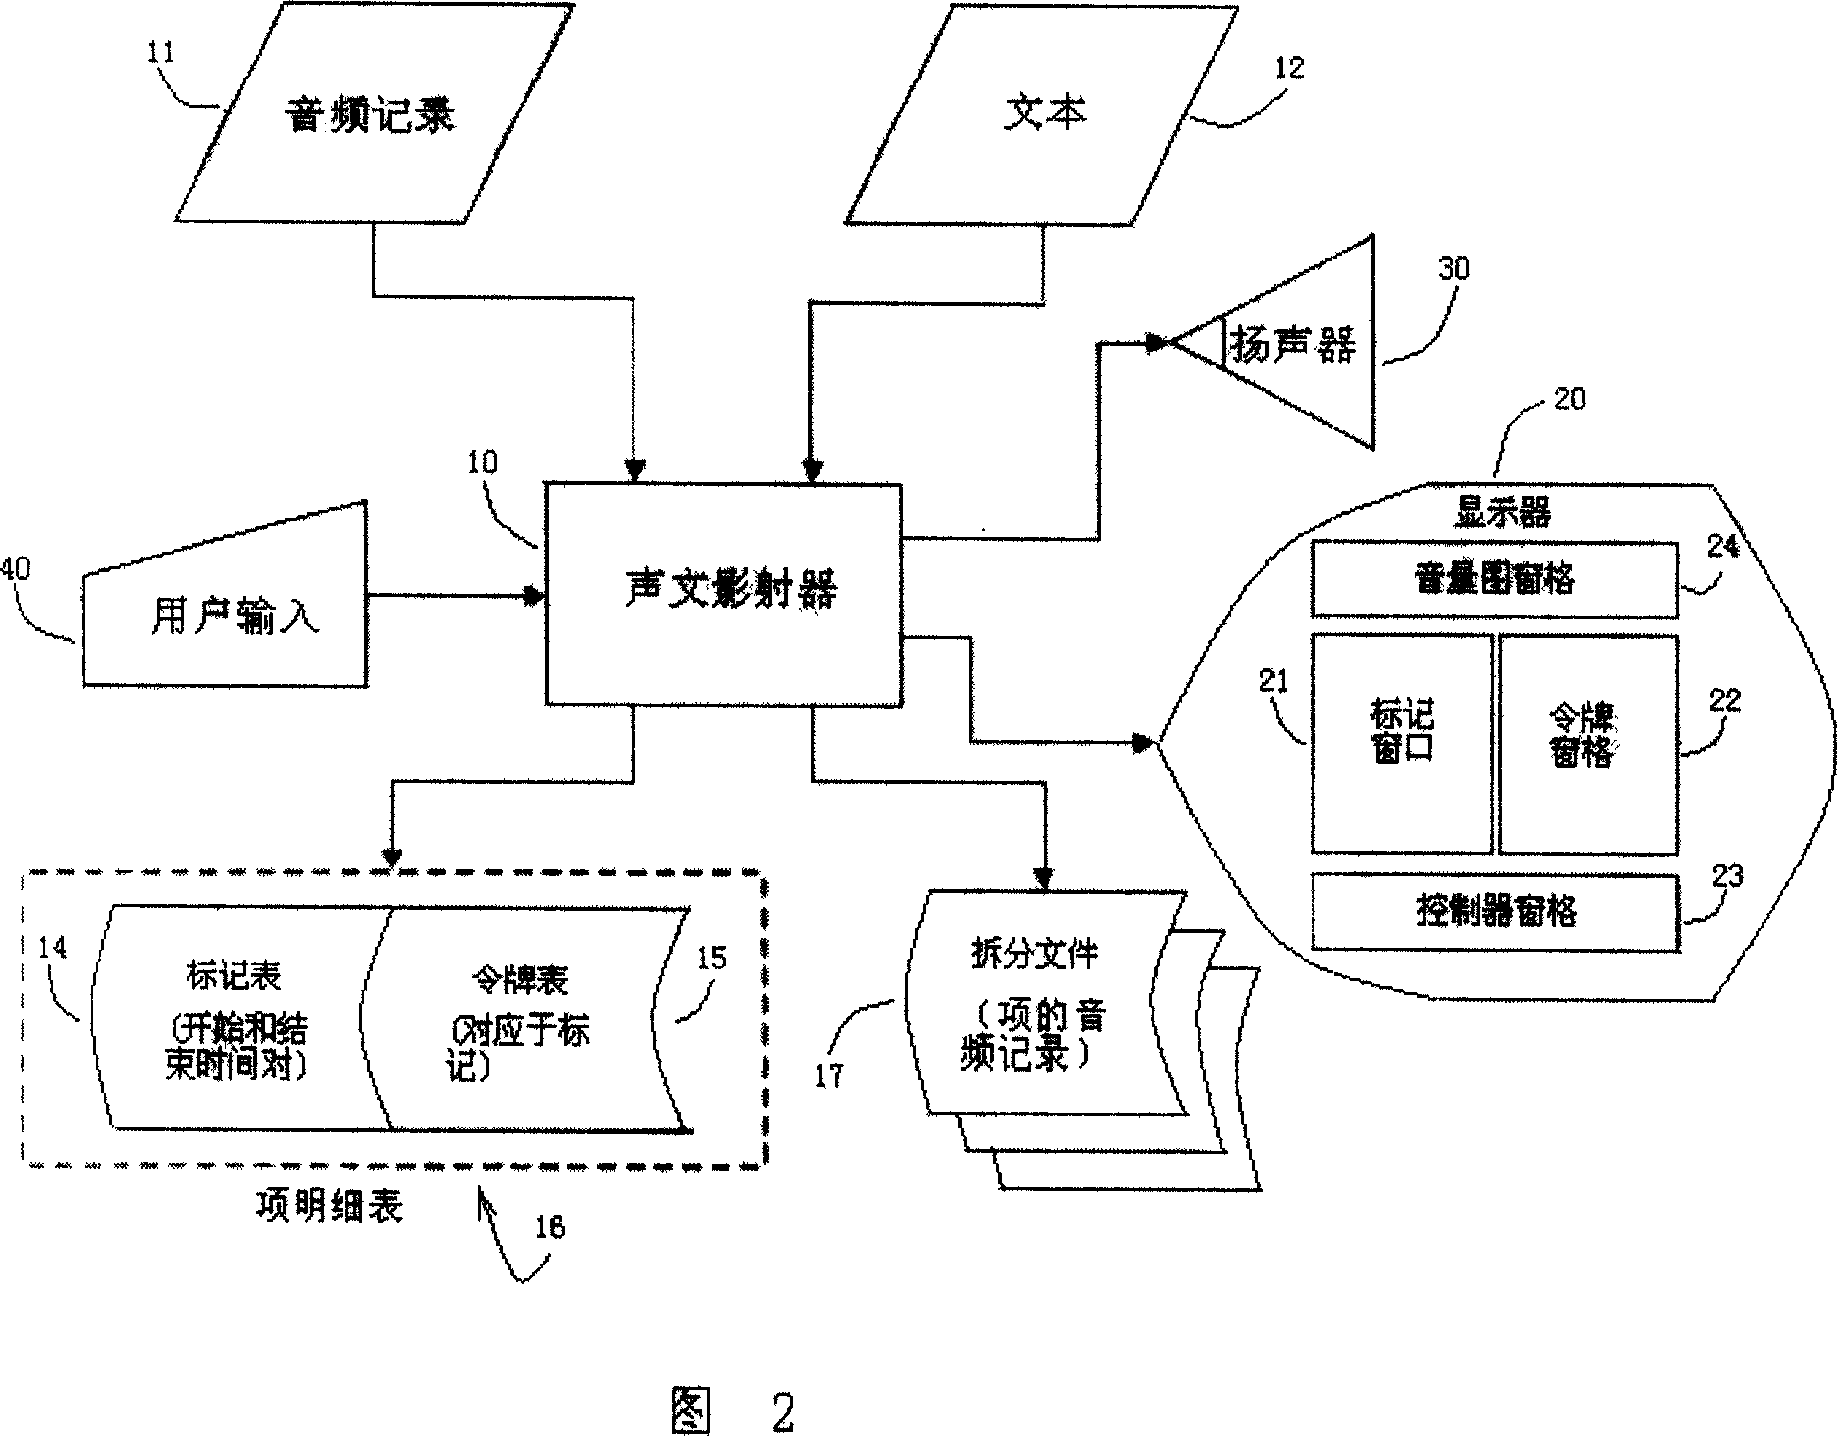 Device and method for text to audio mapping, and animation of the text